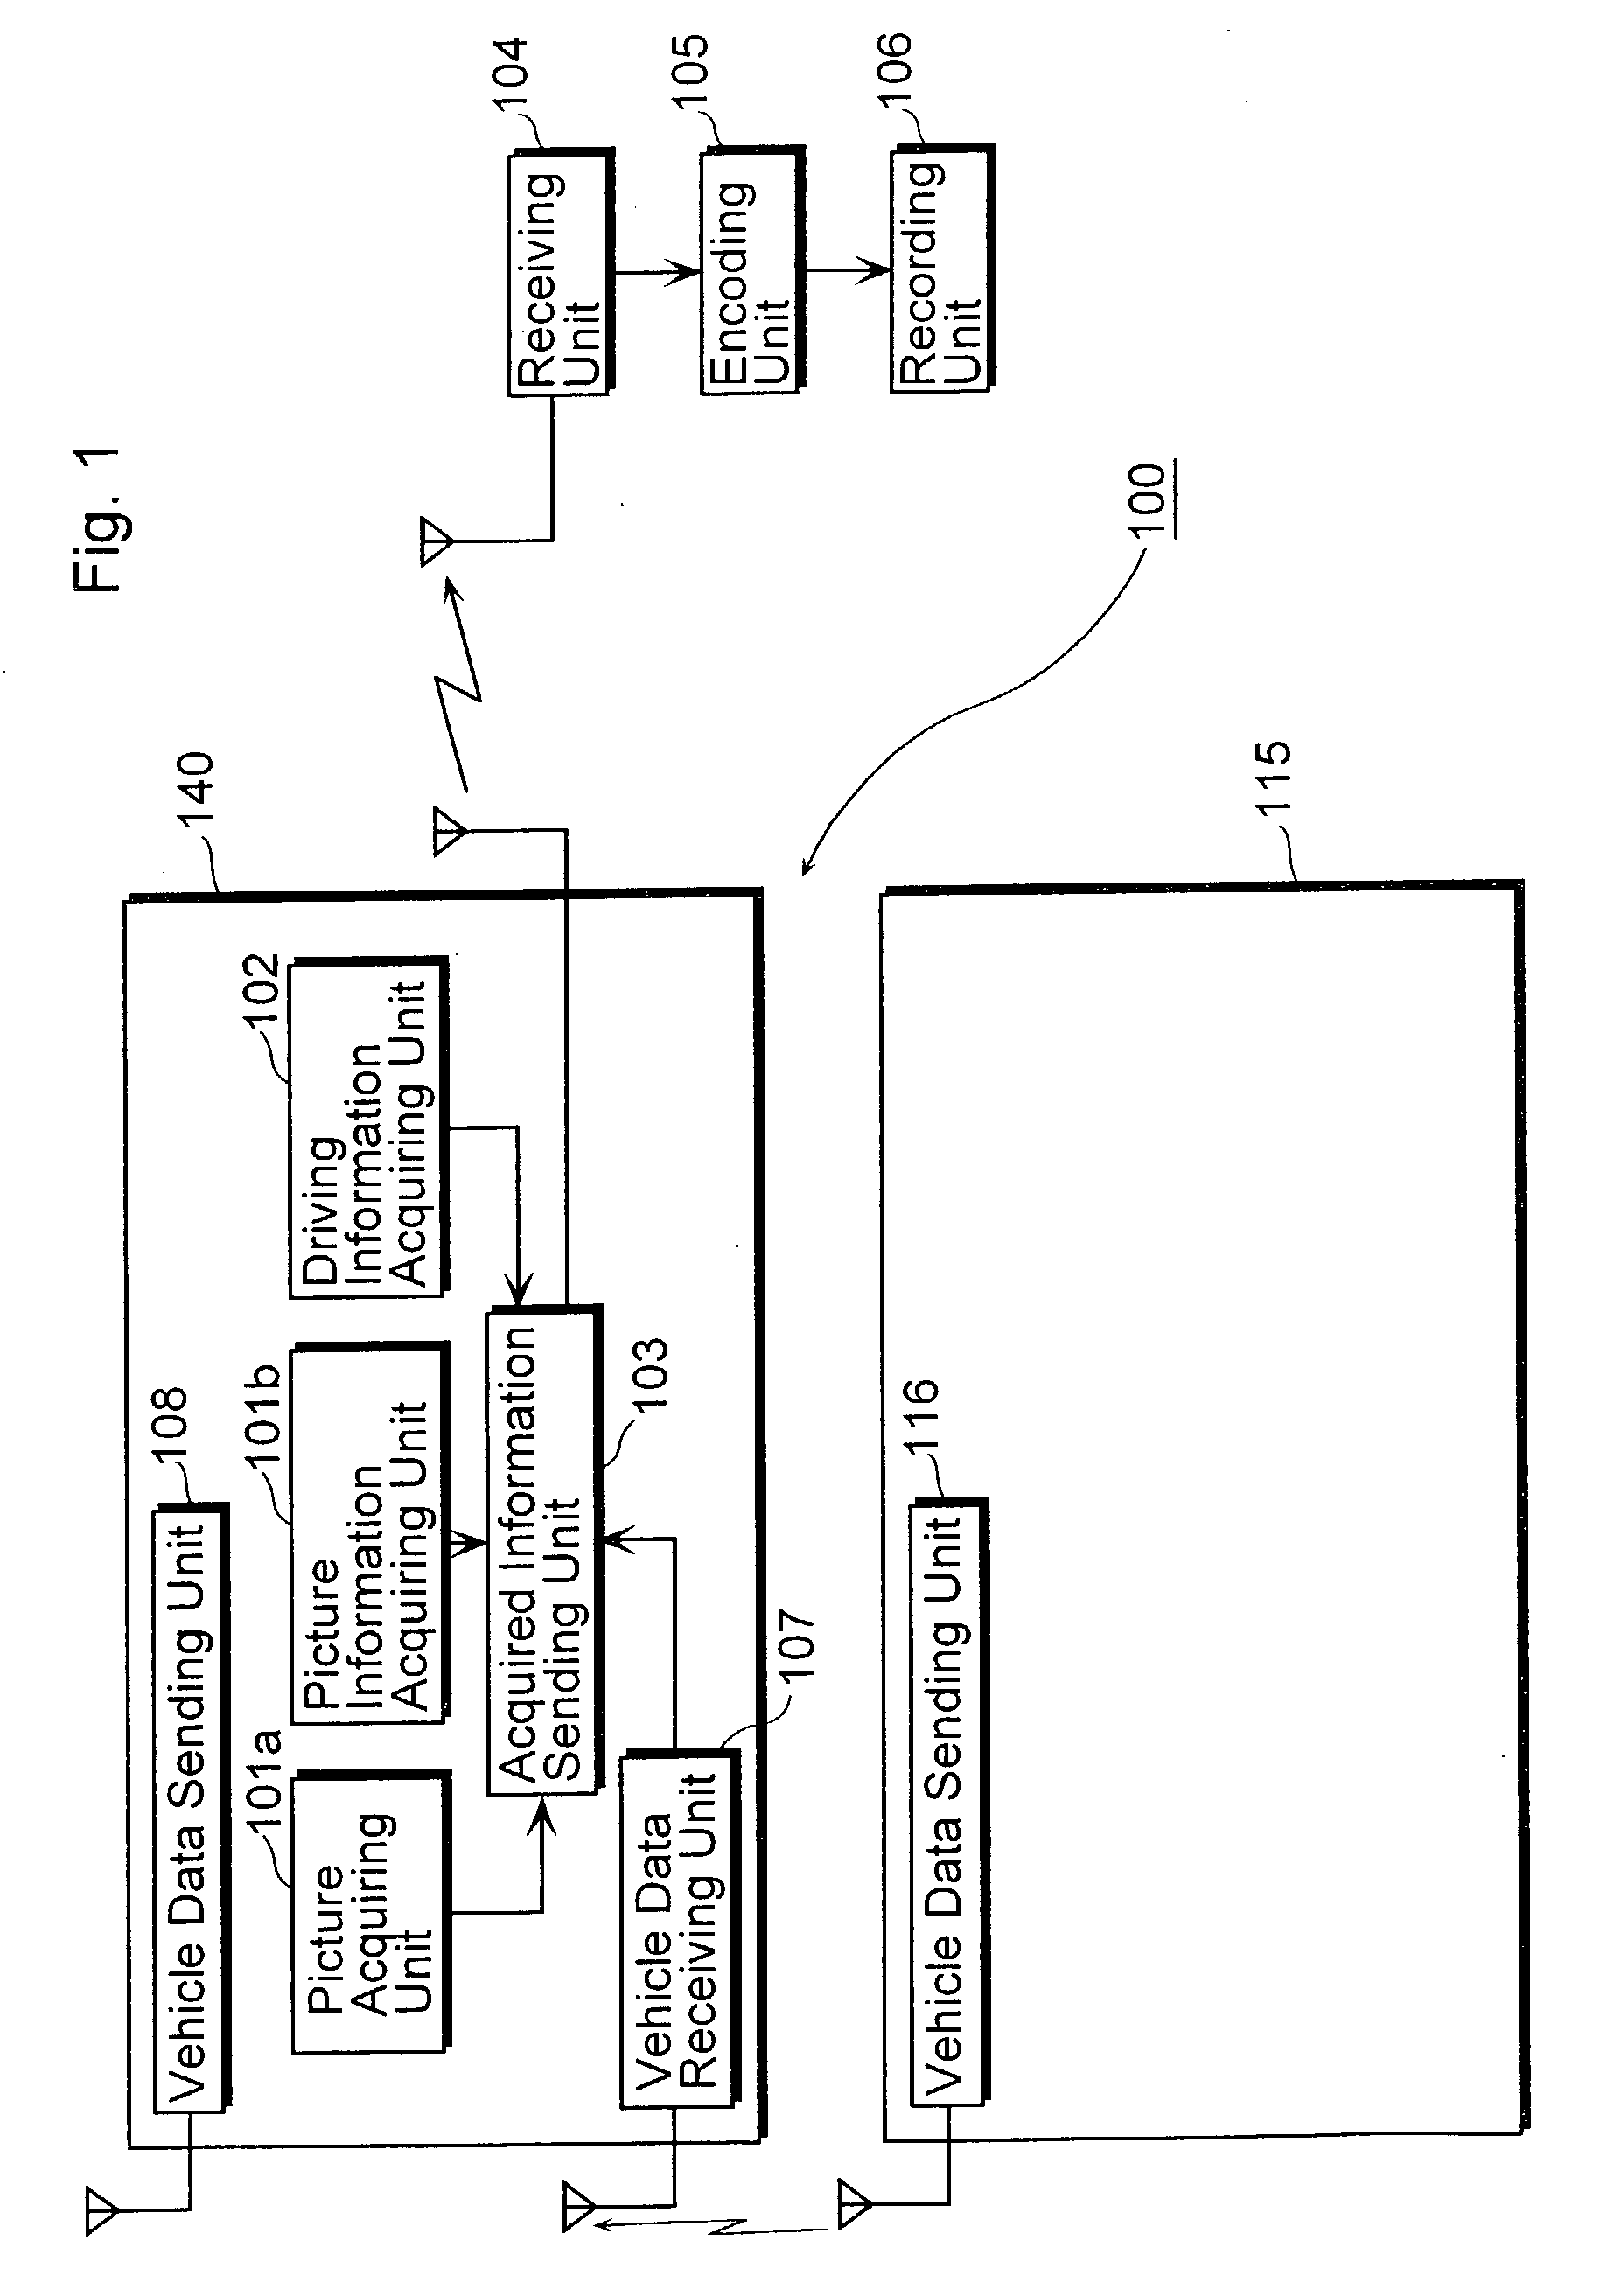 Vehicle information recording system